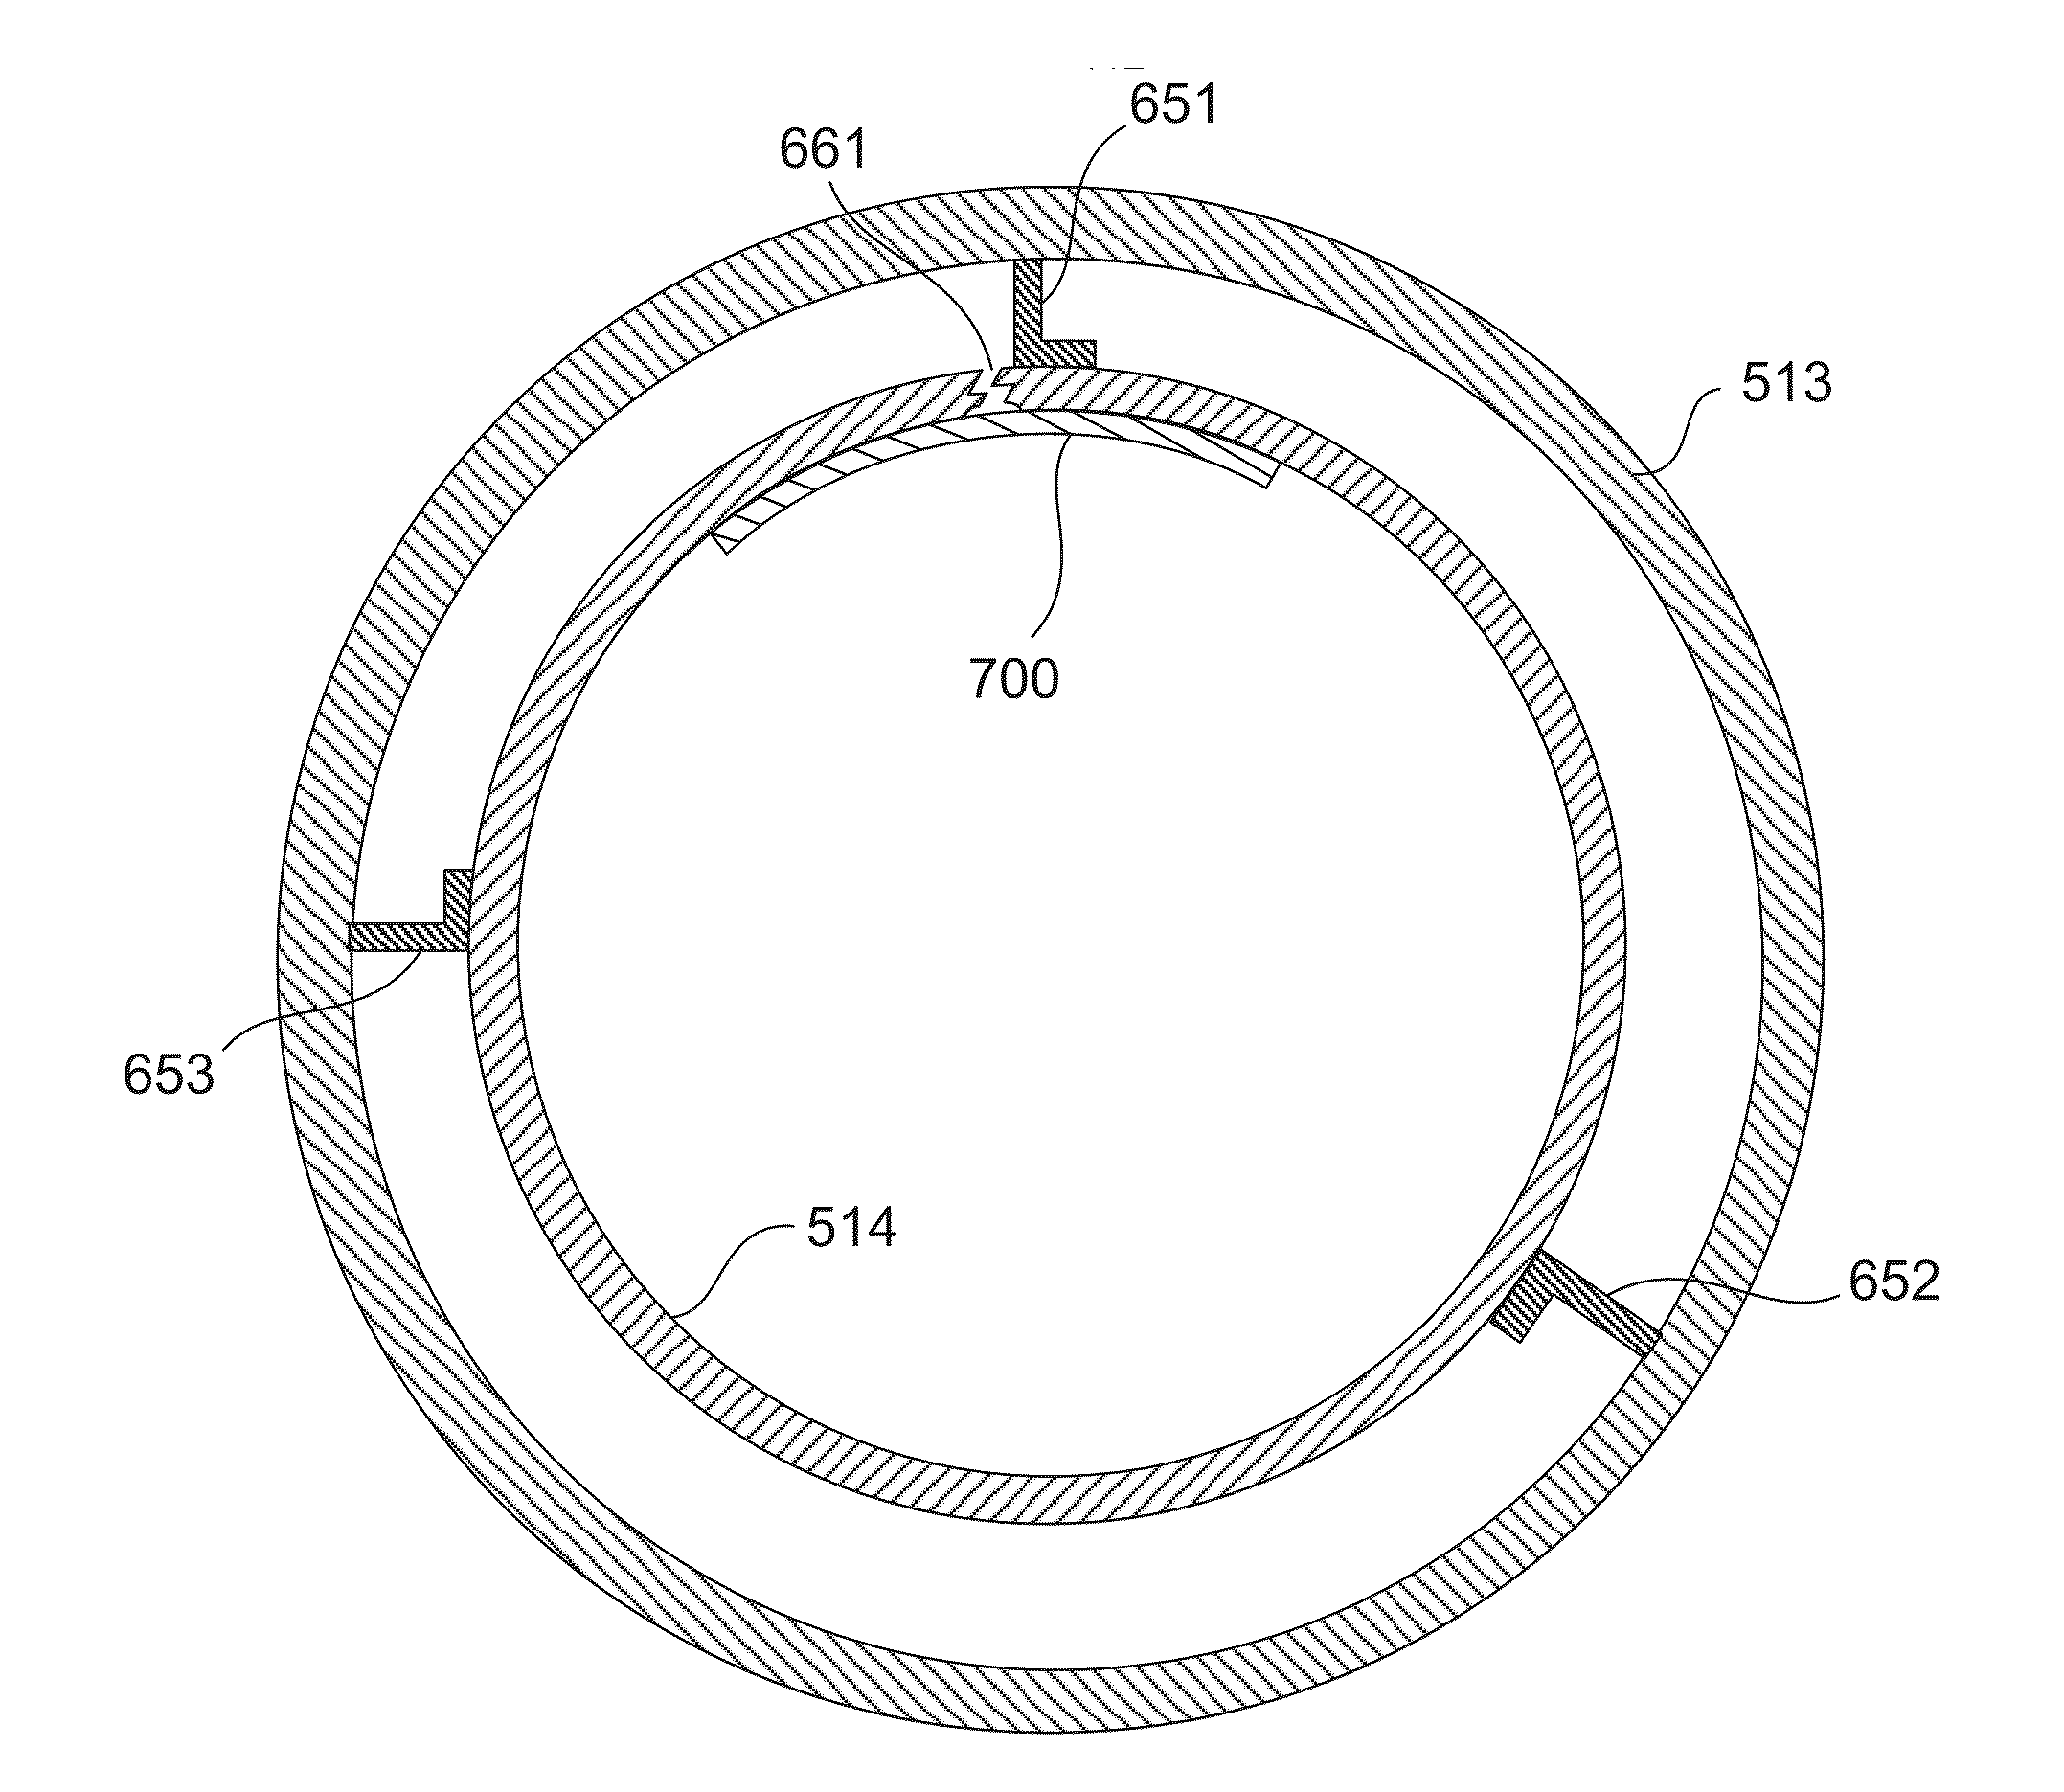 Method and system for repairing or servicing a wye ring